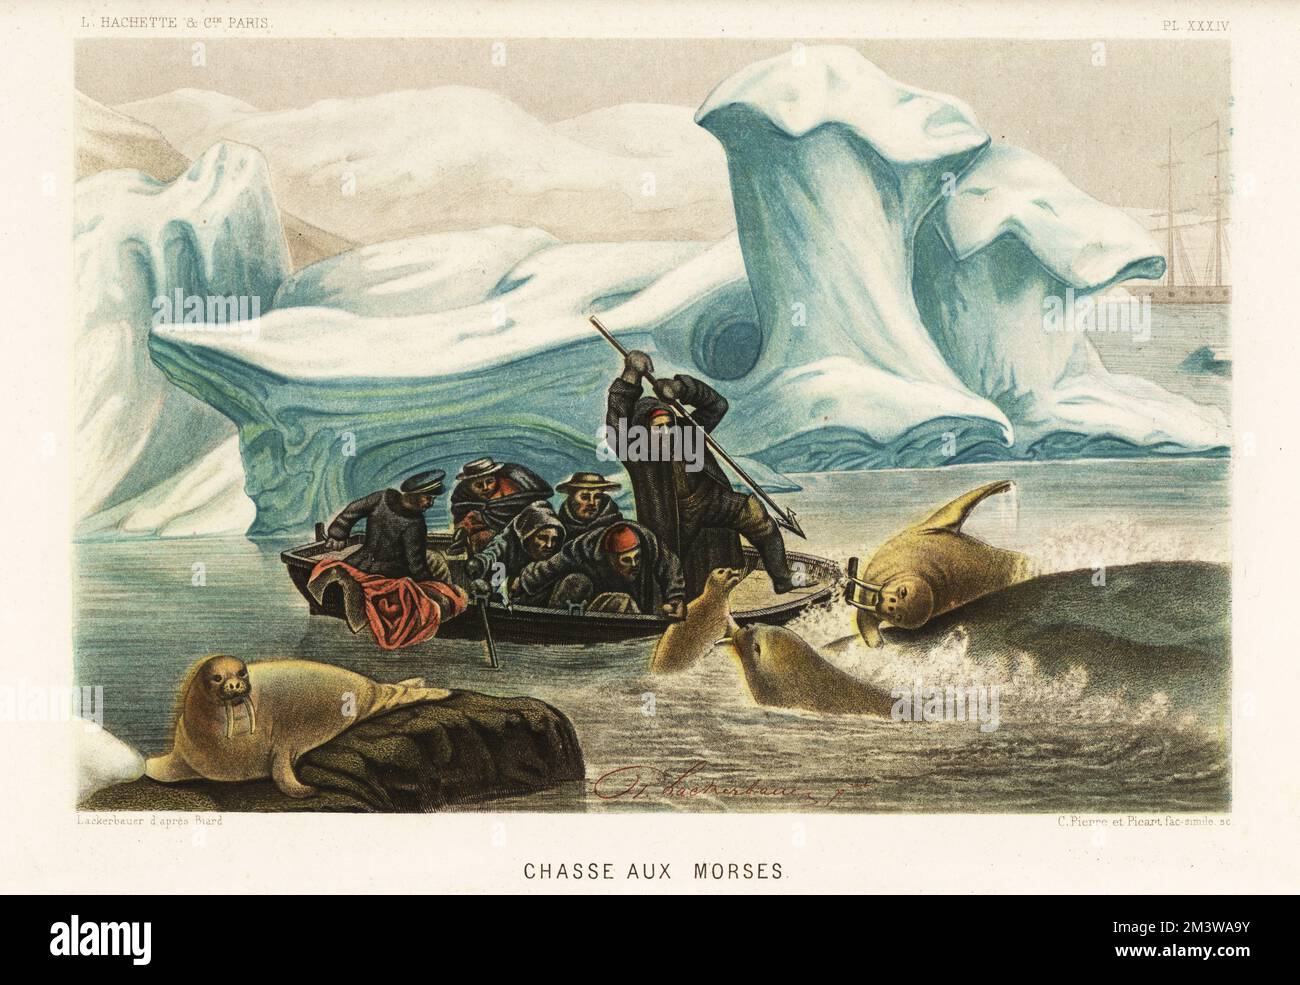 Hunting walrus, Odobenus rosmarus, in the Arctic ice floes. Whalers on a small boat hunting with harpoon. Chasses aux morses. Chromolithograph by C. Pierre and Bernard Picart Pierre Lackerbauer after landscape artist François-Auguste Biard from Alfred Fredol’s Le Monde de la Mer, the World of the Sea, edited by Olivier Fredol, Librairie Hachette et. Cie., Paris, 1881. Alfred Fredol was the pseudonym of French zoologist and botanist Alfred Moquin-Tandon, 1804-1863. Stock Photo